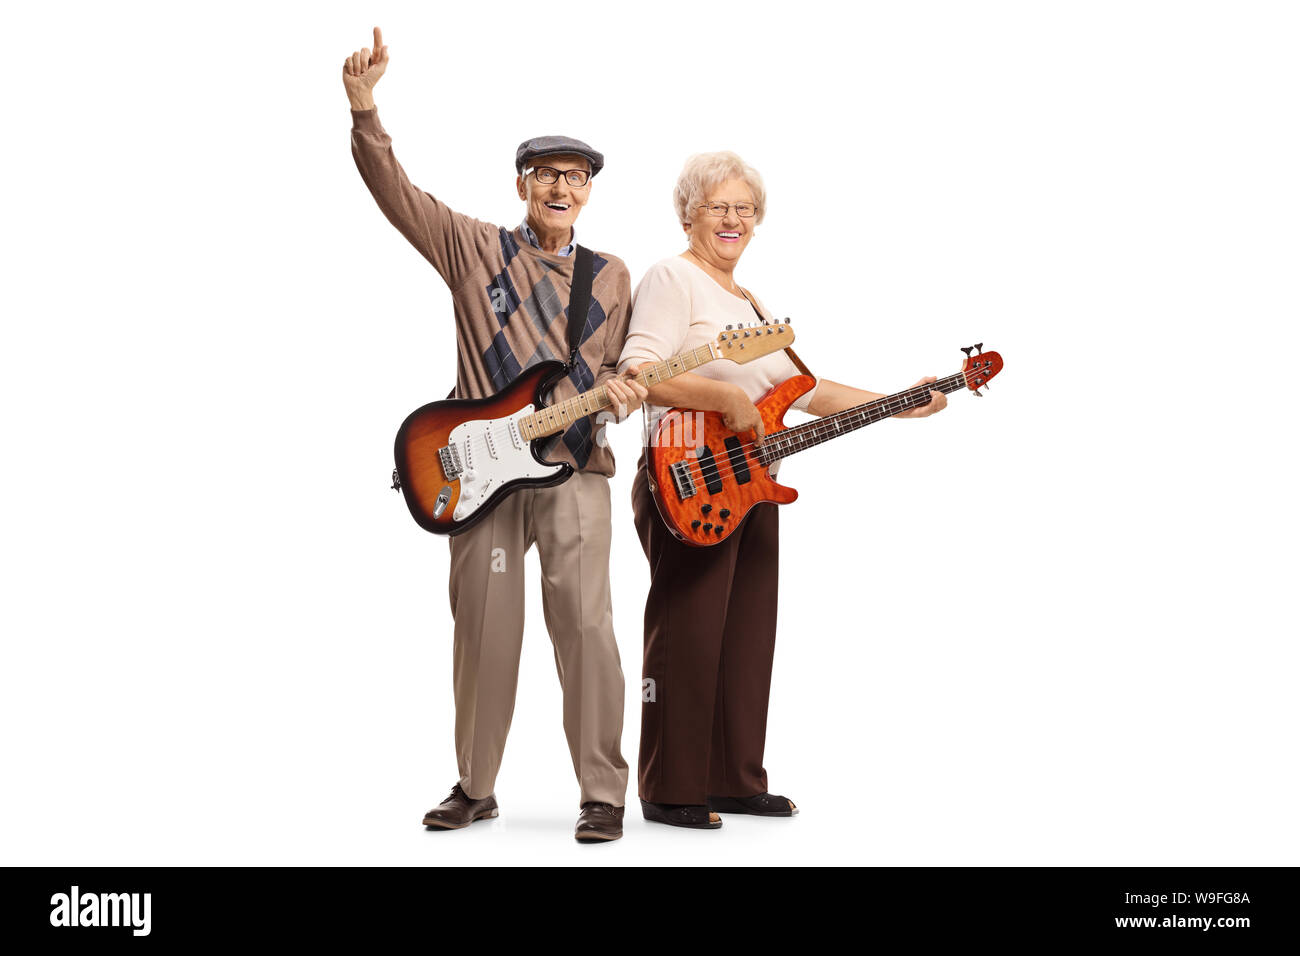 Full length portrait of cool elderly man and woman with electric guitars isolated on white background Stock Photo